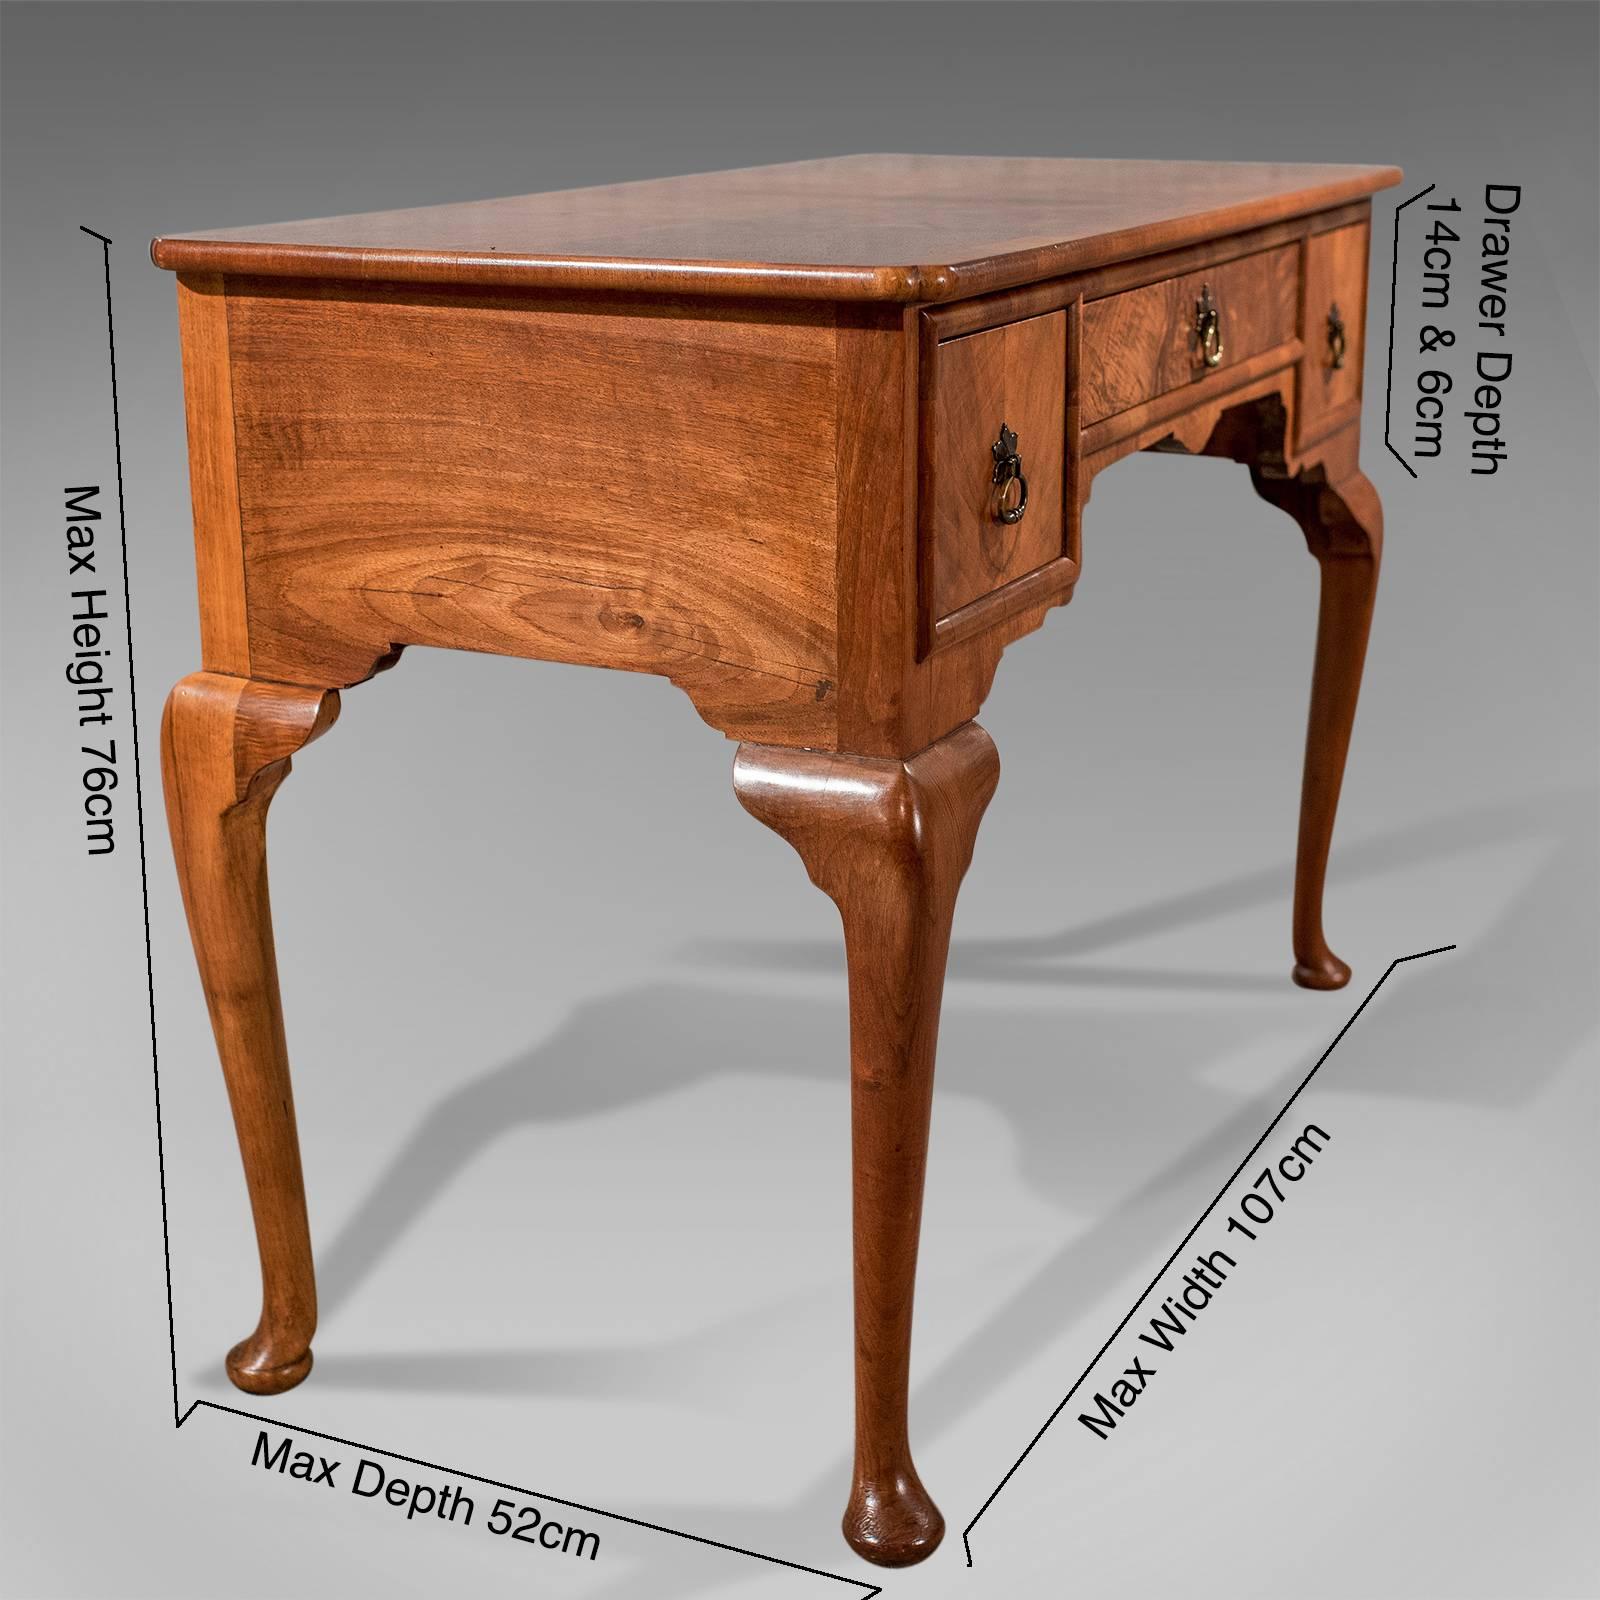 A most pleasing writing desk presented in excellent antique condition
Displaying fabulous burr walnut veneer
Delightfully dressed with original quality cast brass handles
Offering practical and attractive use as a desk or a side table
Rising